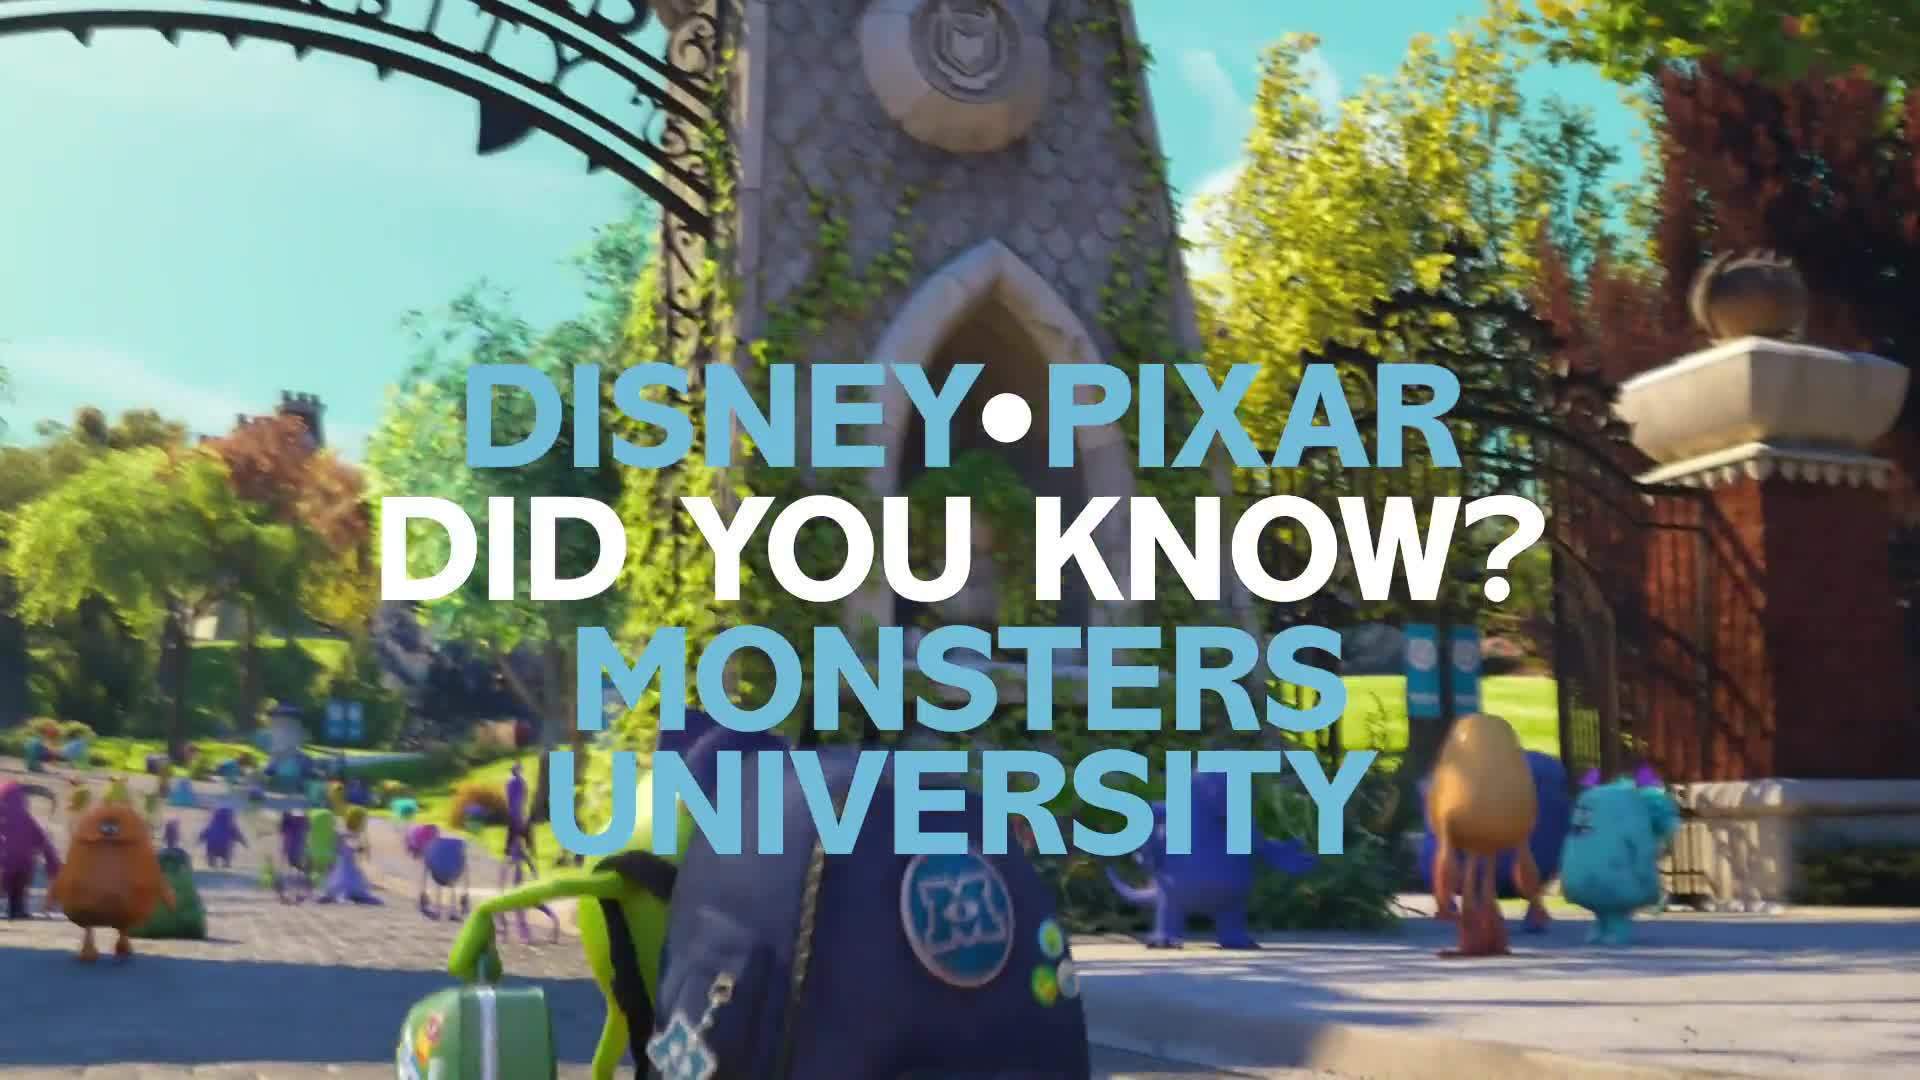 Pixar Did You Know? Fun Facts About Monsters University